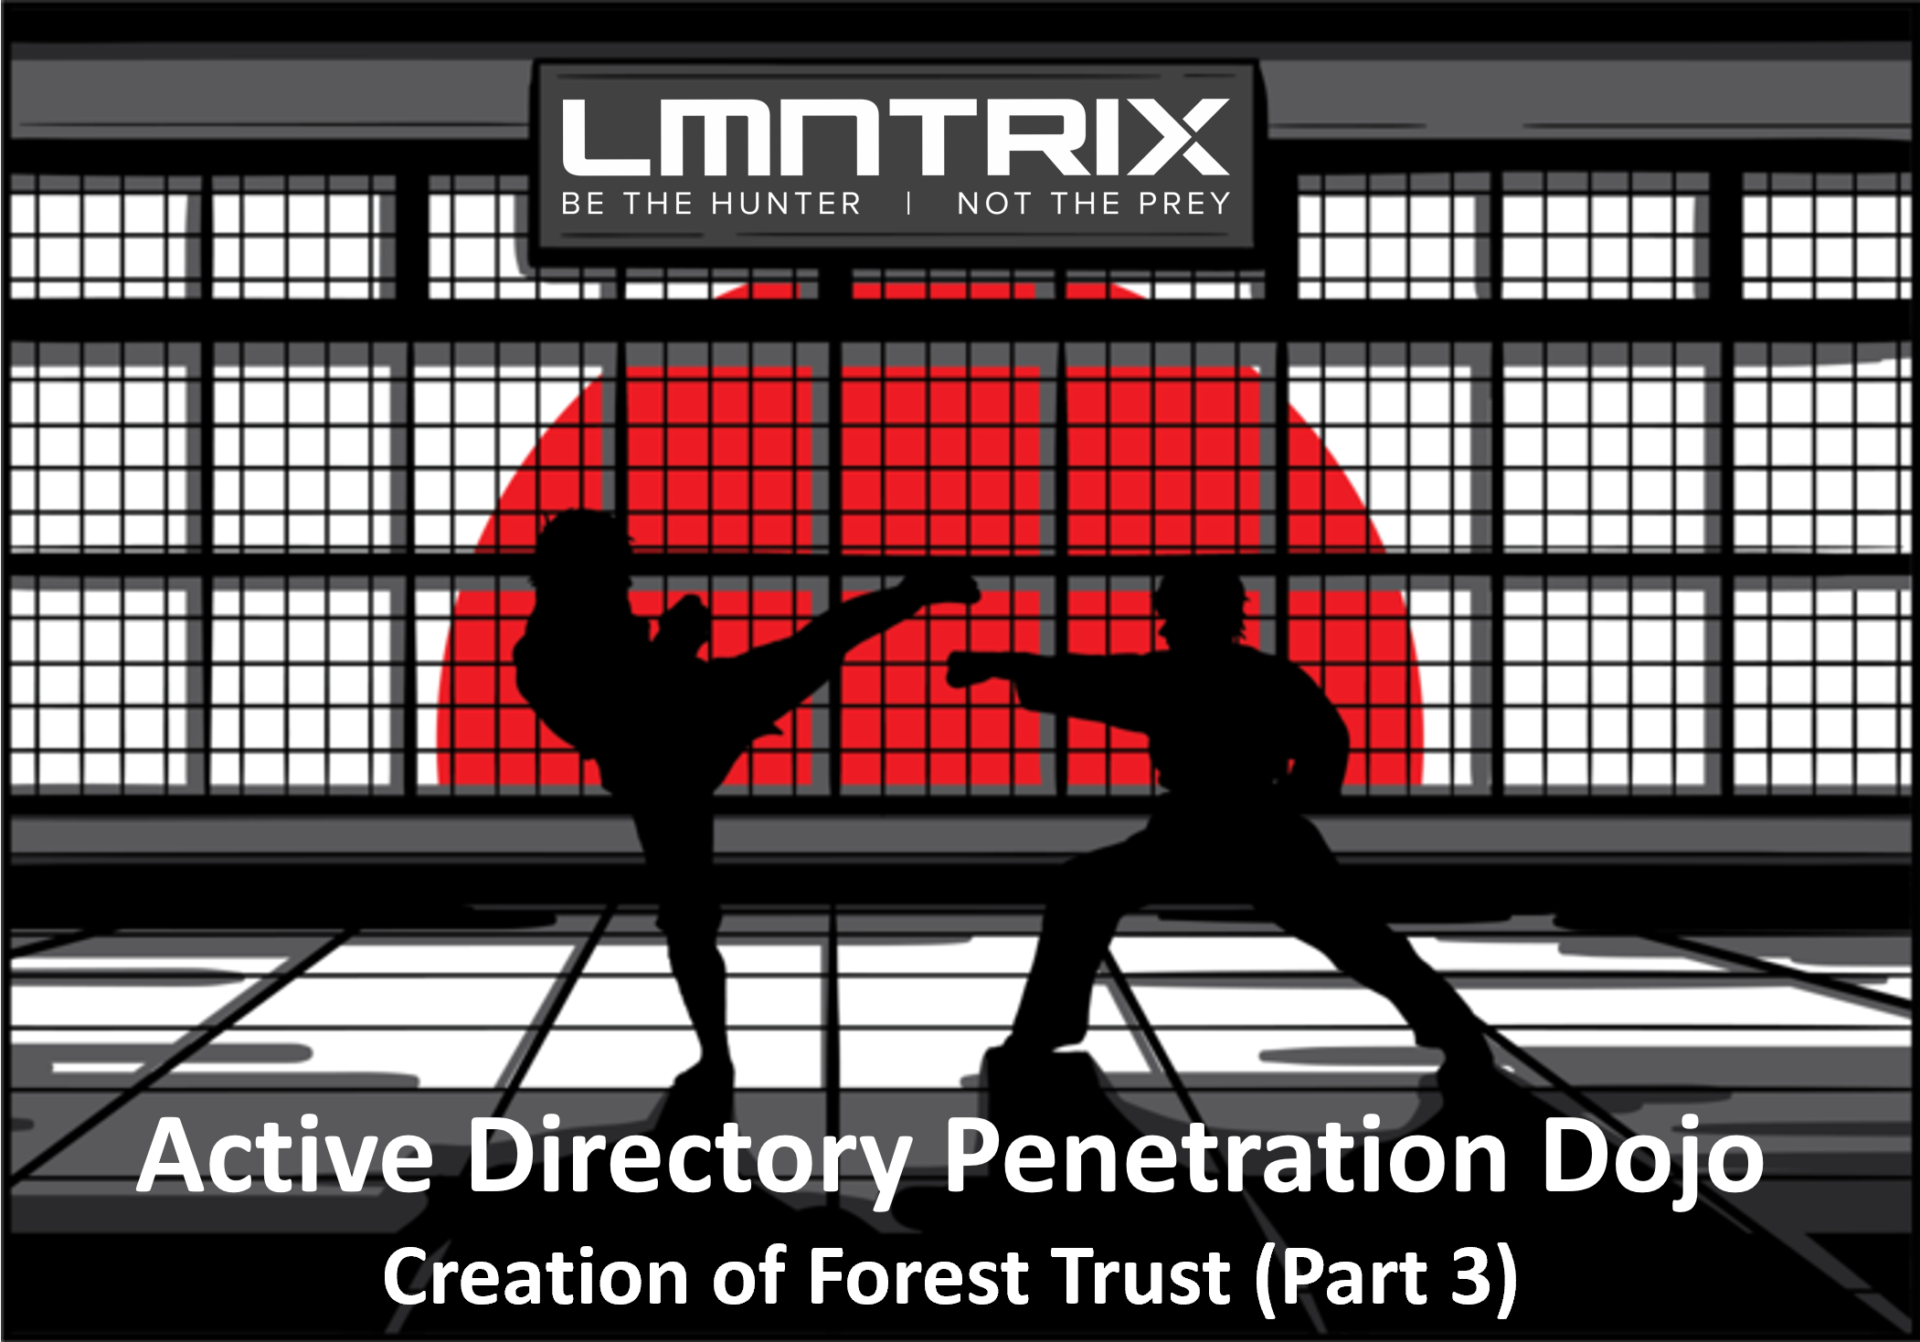 Active Directory Penetration Dojo - Creation of Forest Trust (Part 3)